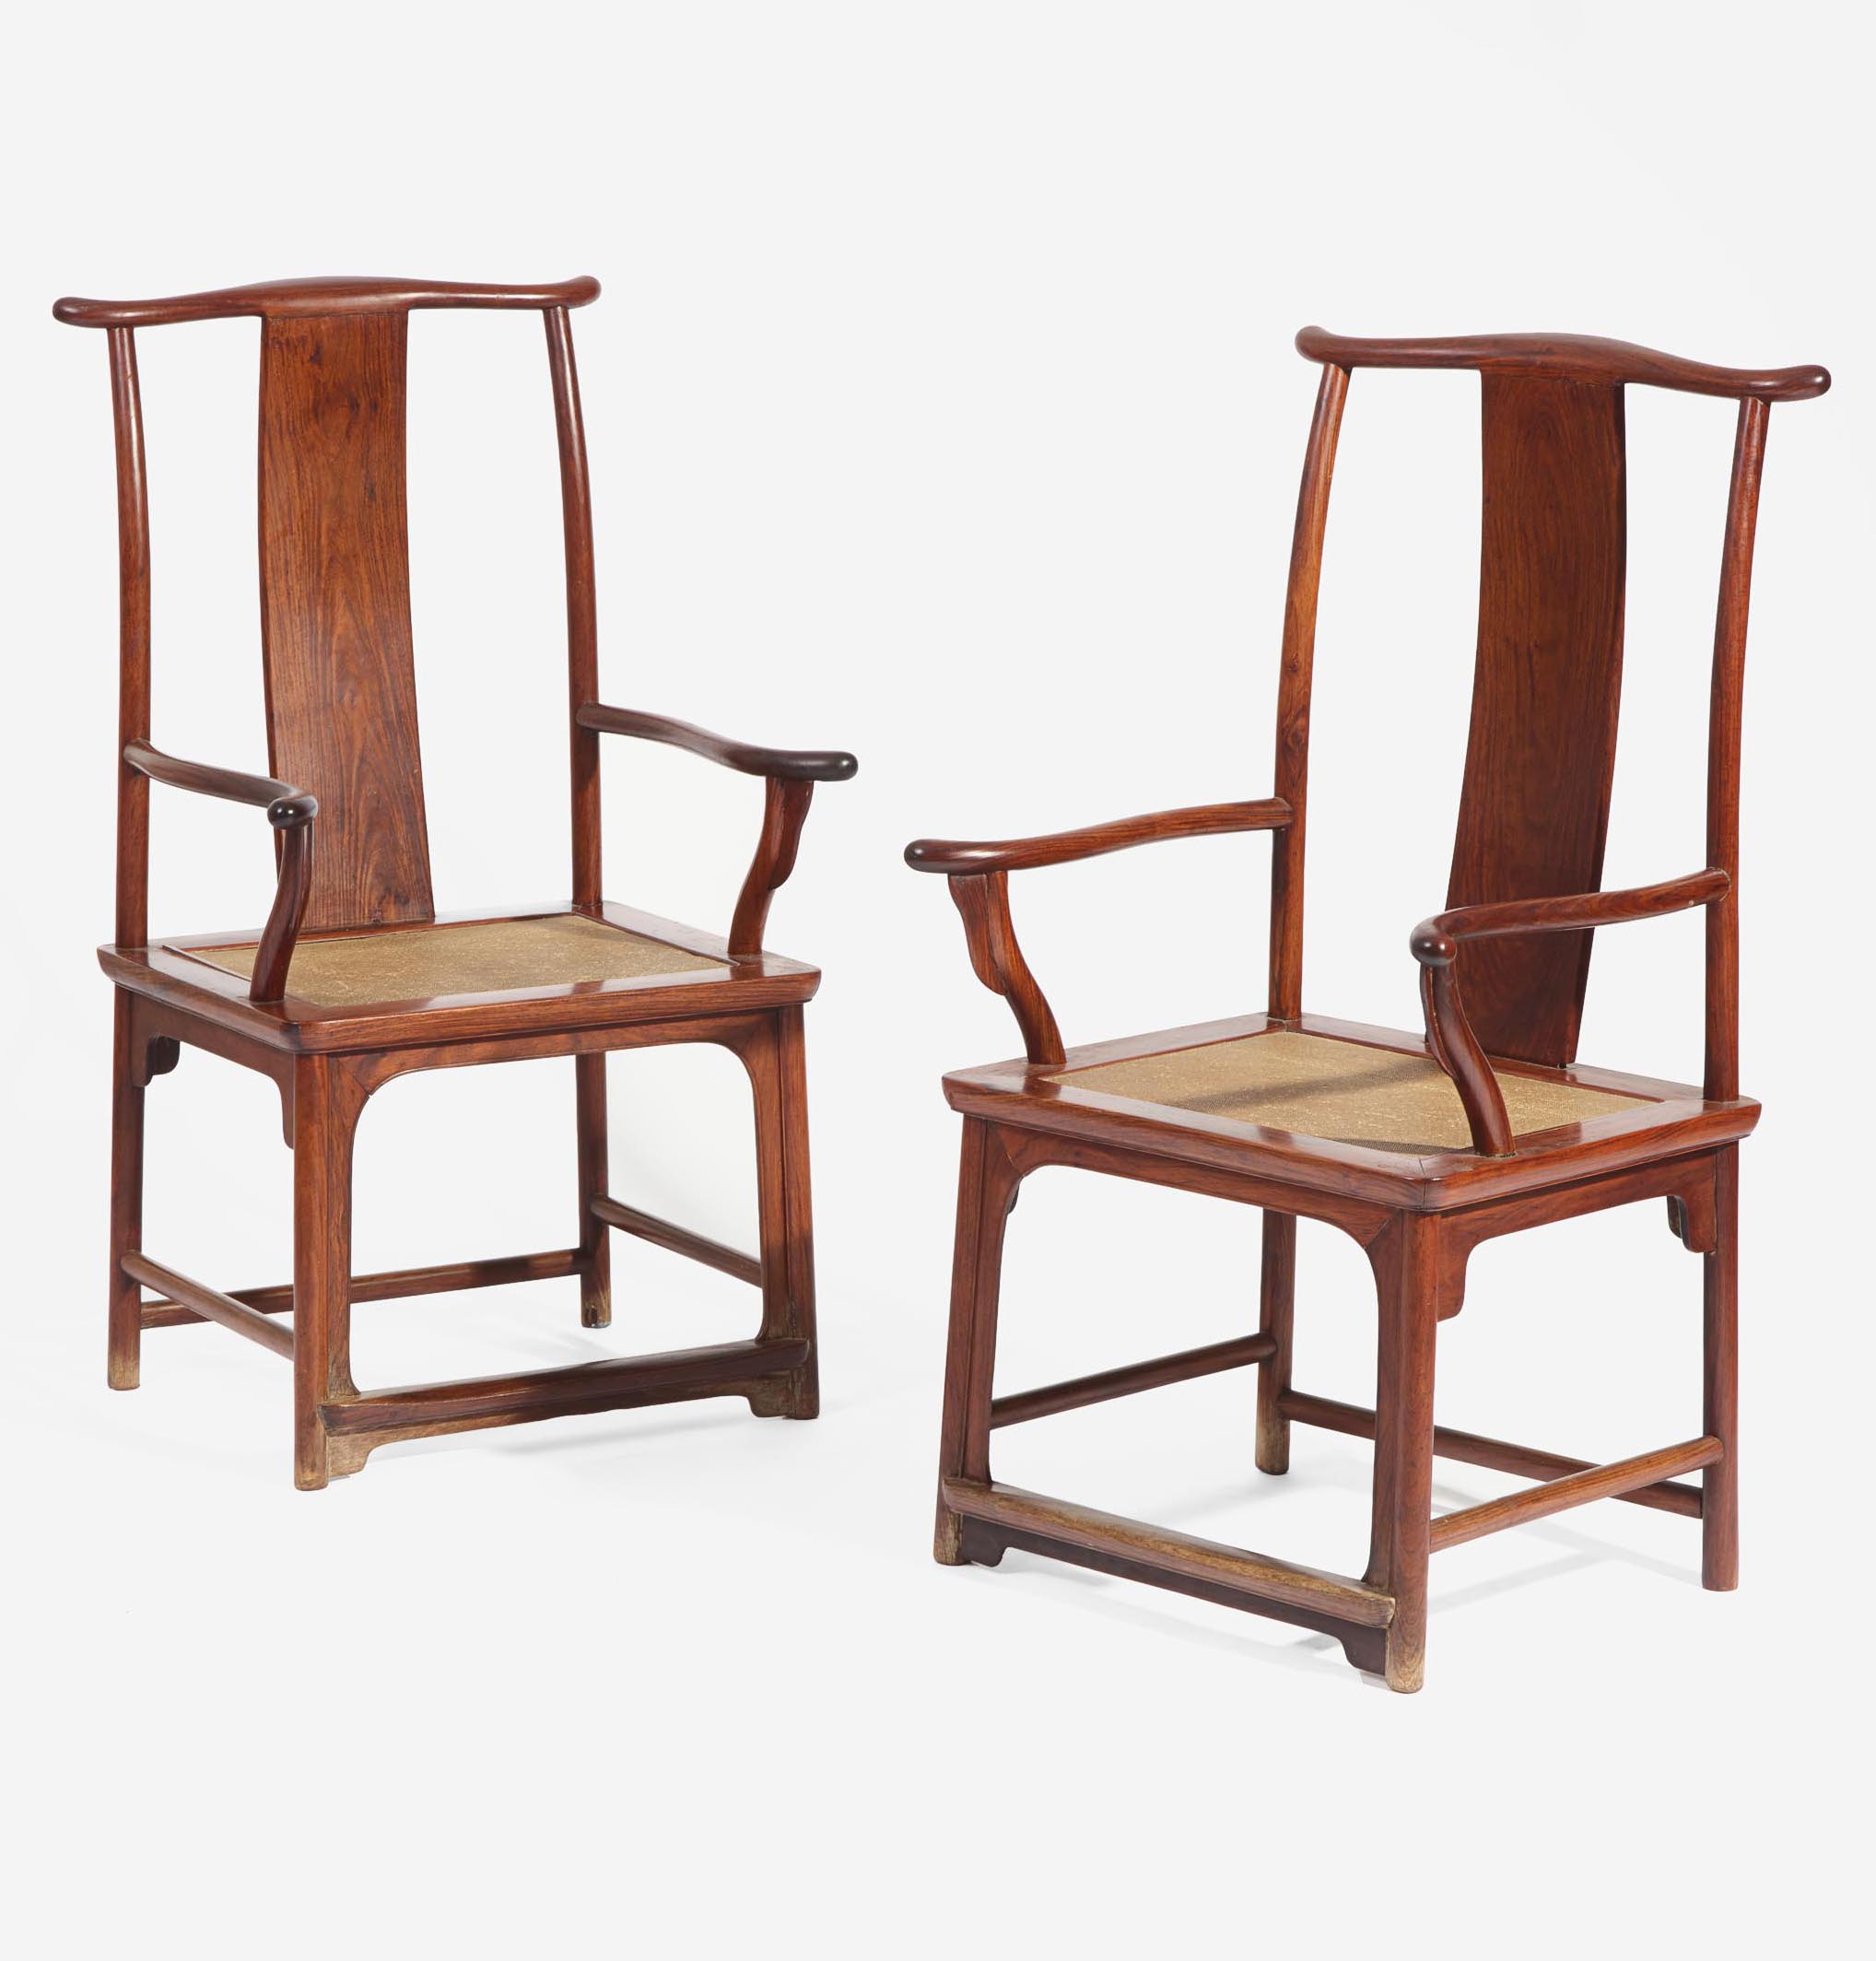 $948,000 Sale of Chairs in Freeman’s Asian Auction Shows Power of Global Market